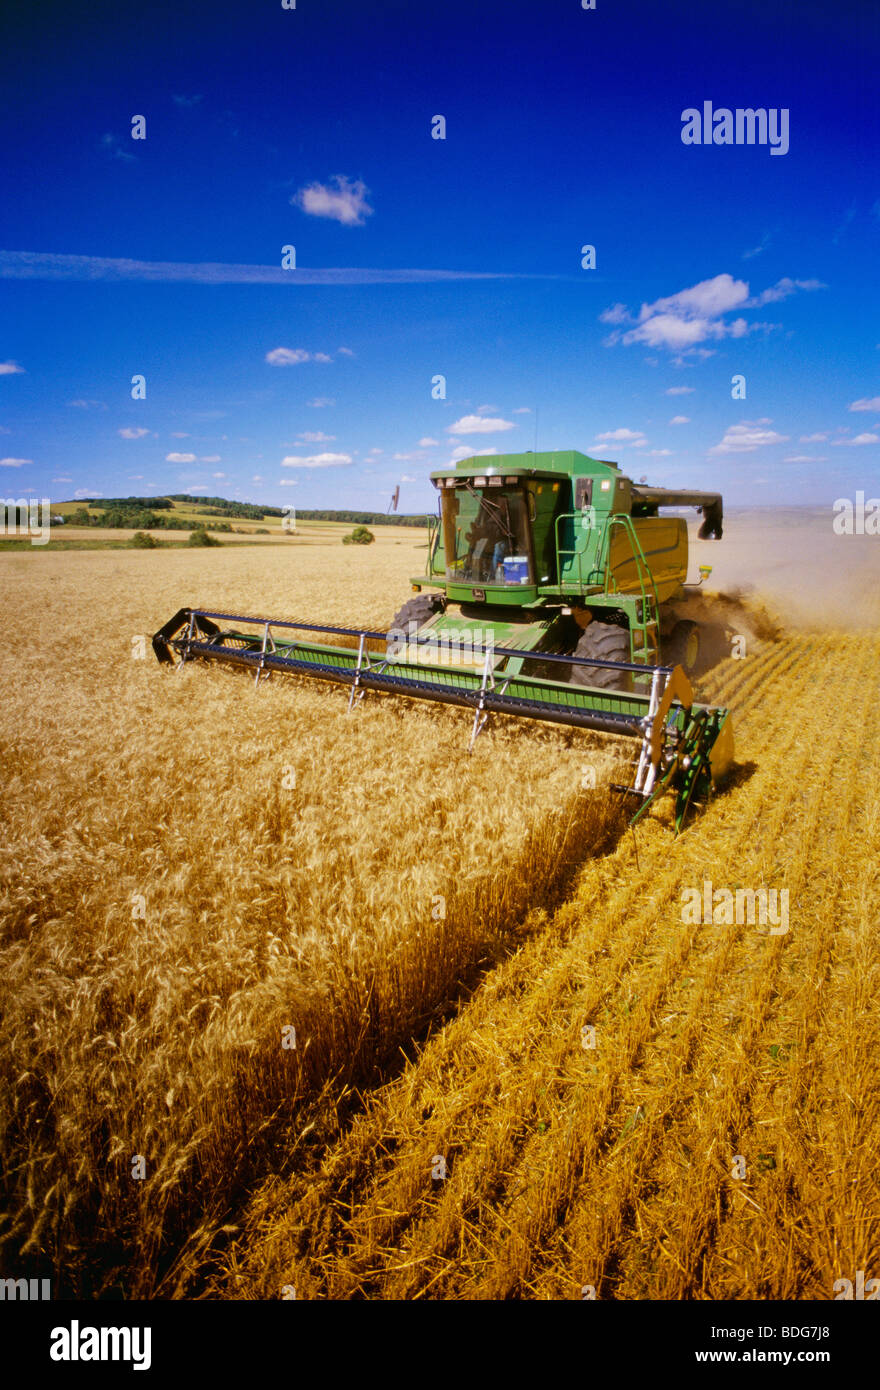 Agriculture - A combine harvests Winter wheat in late Summer in bright afternoon sunlight / near Holland, Manitoba, Canada. Stock Photo